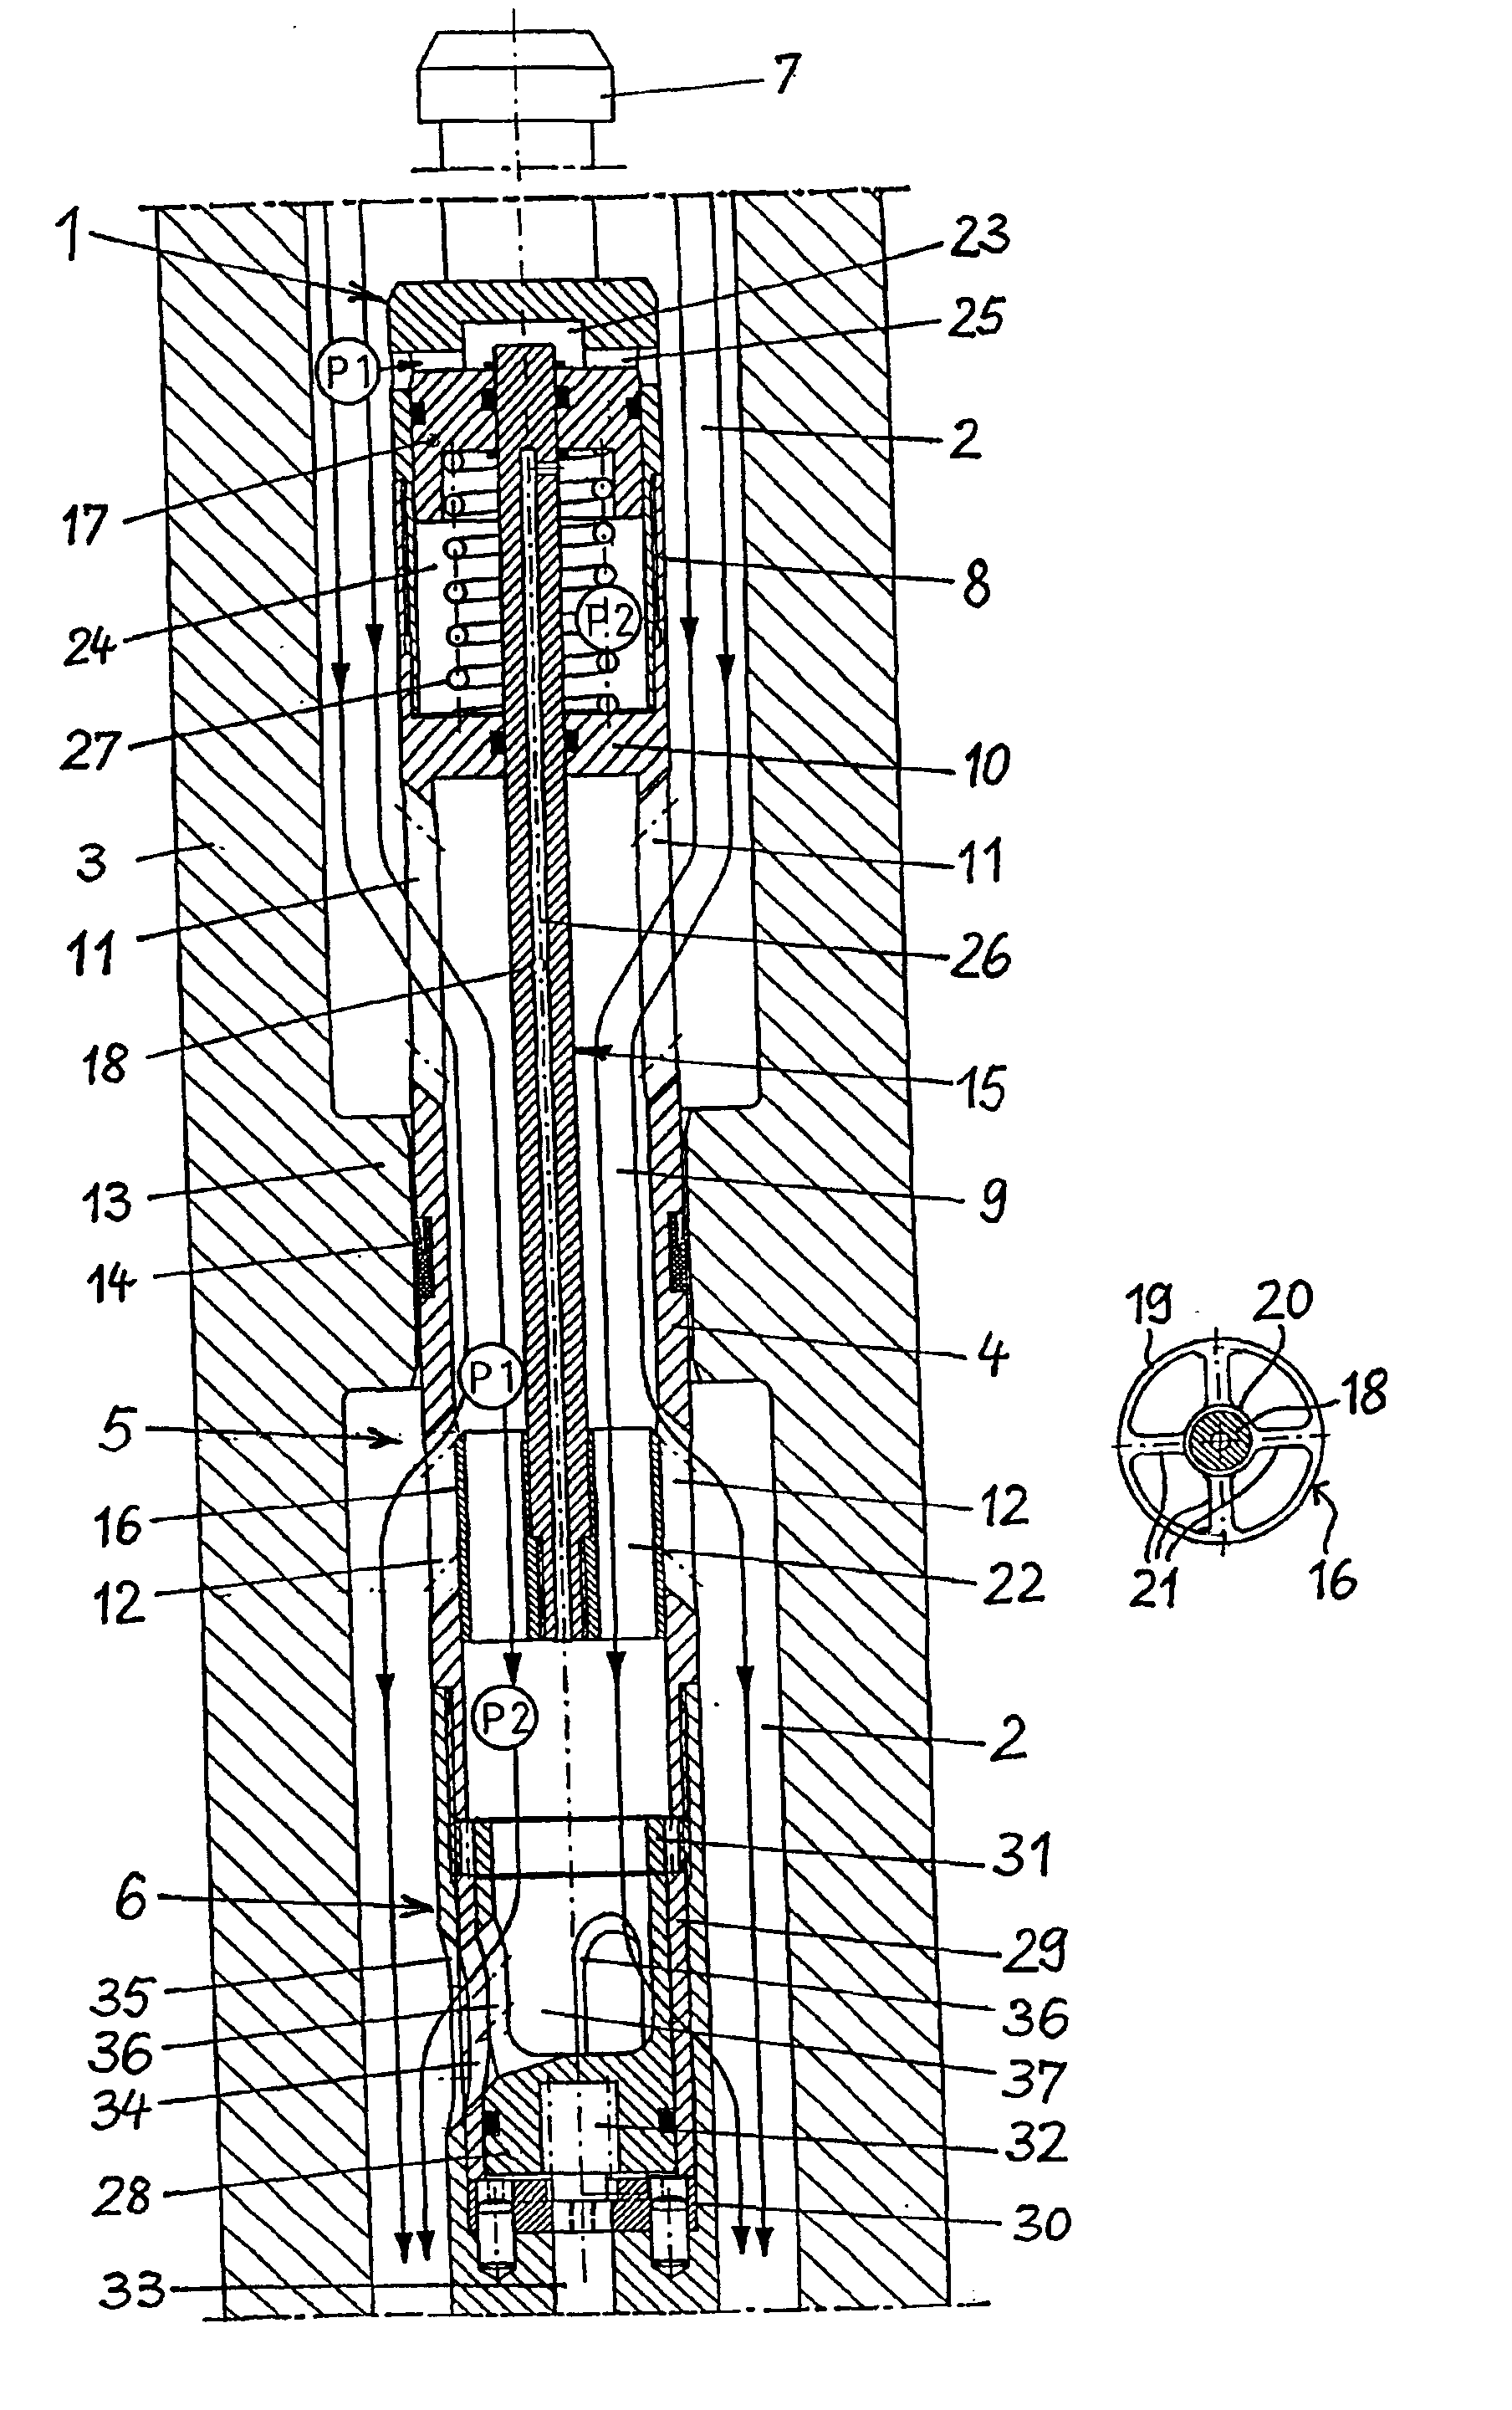 Borehole logging apparatus for deep well drilling